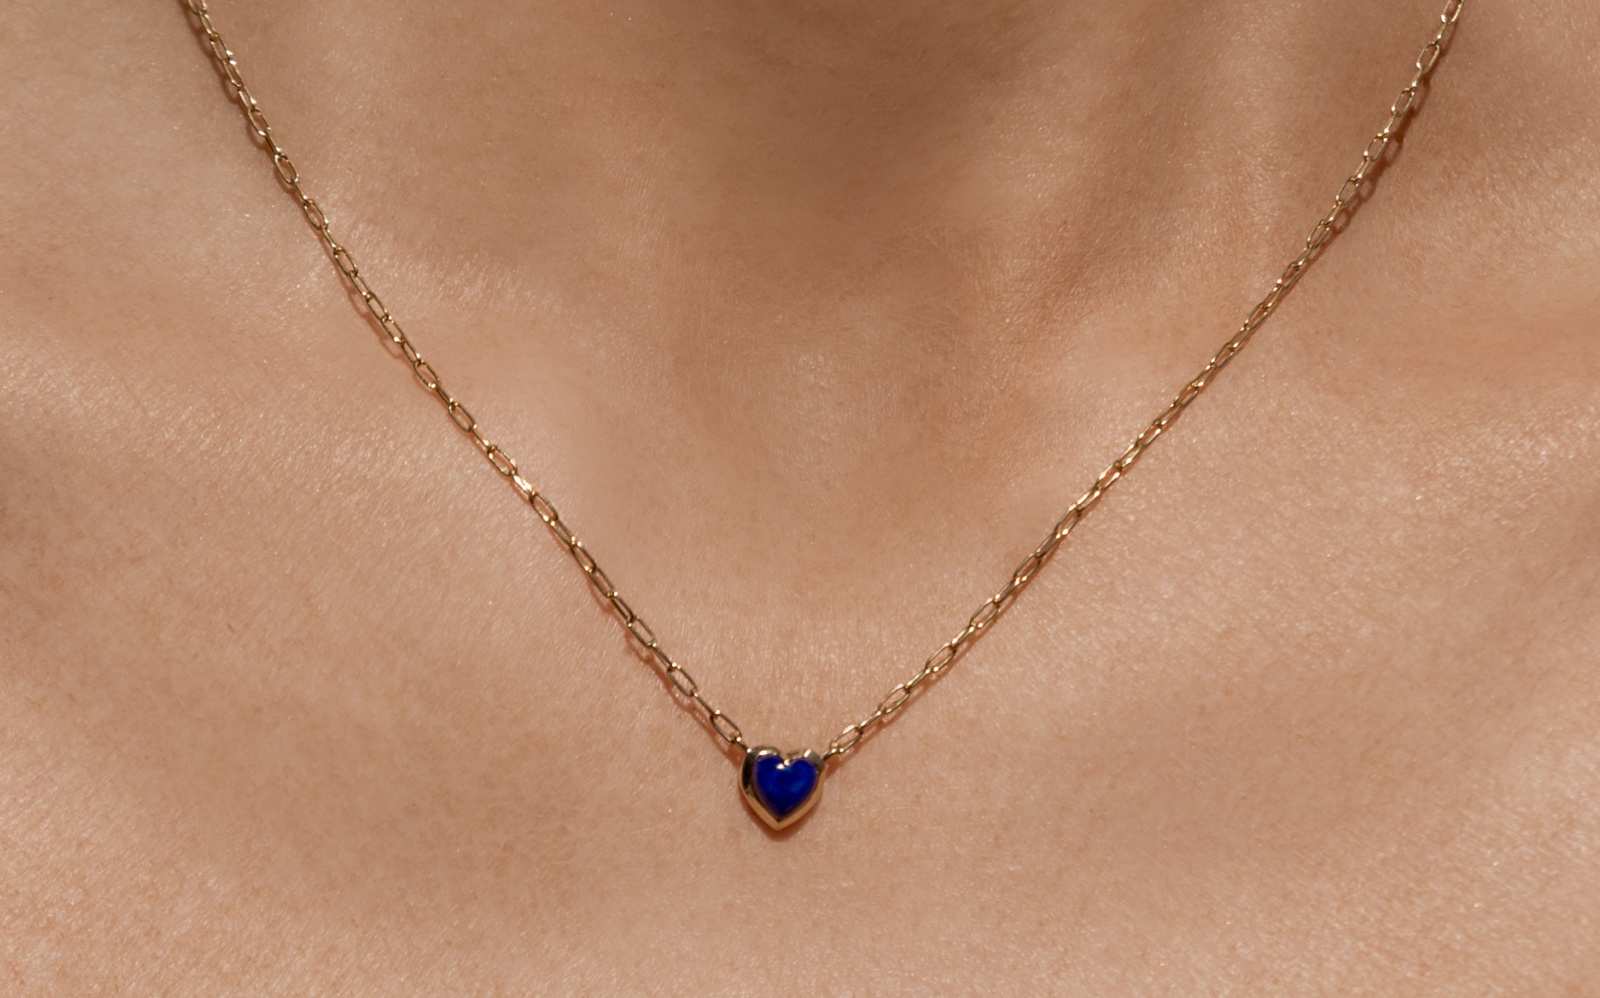 Sweetheart Lapis Small Heart Necklace Yellow Gold